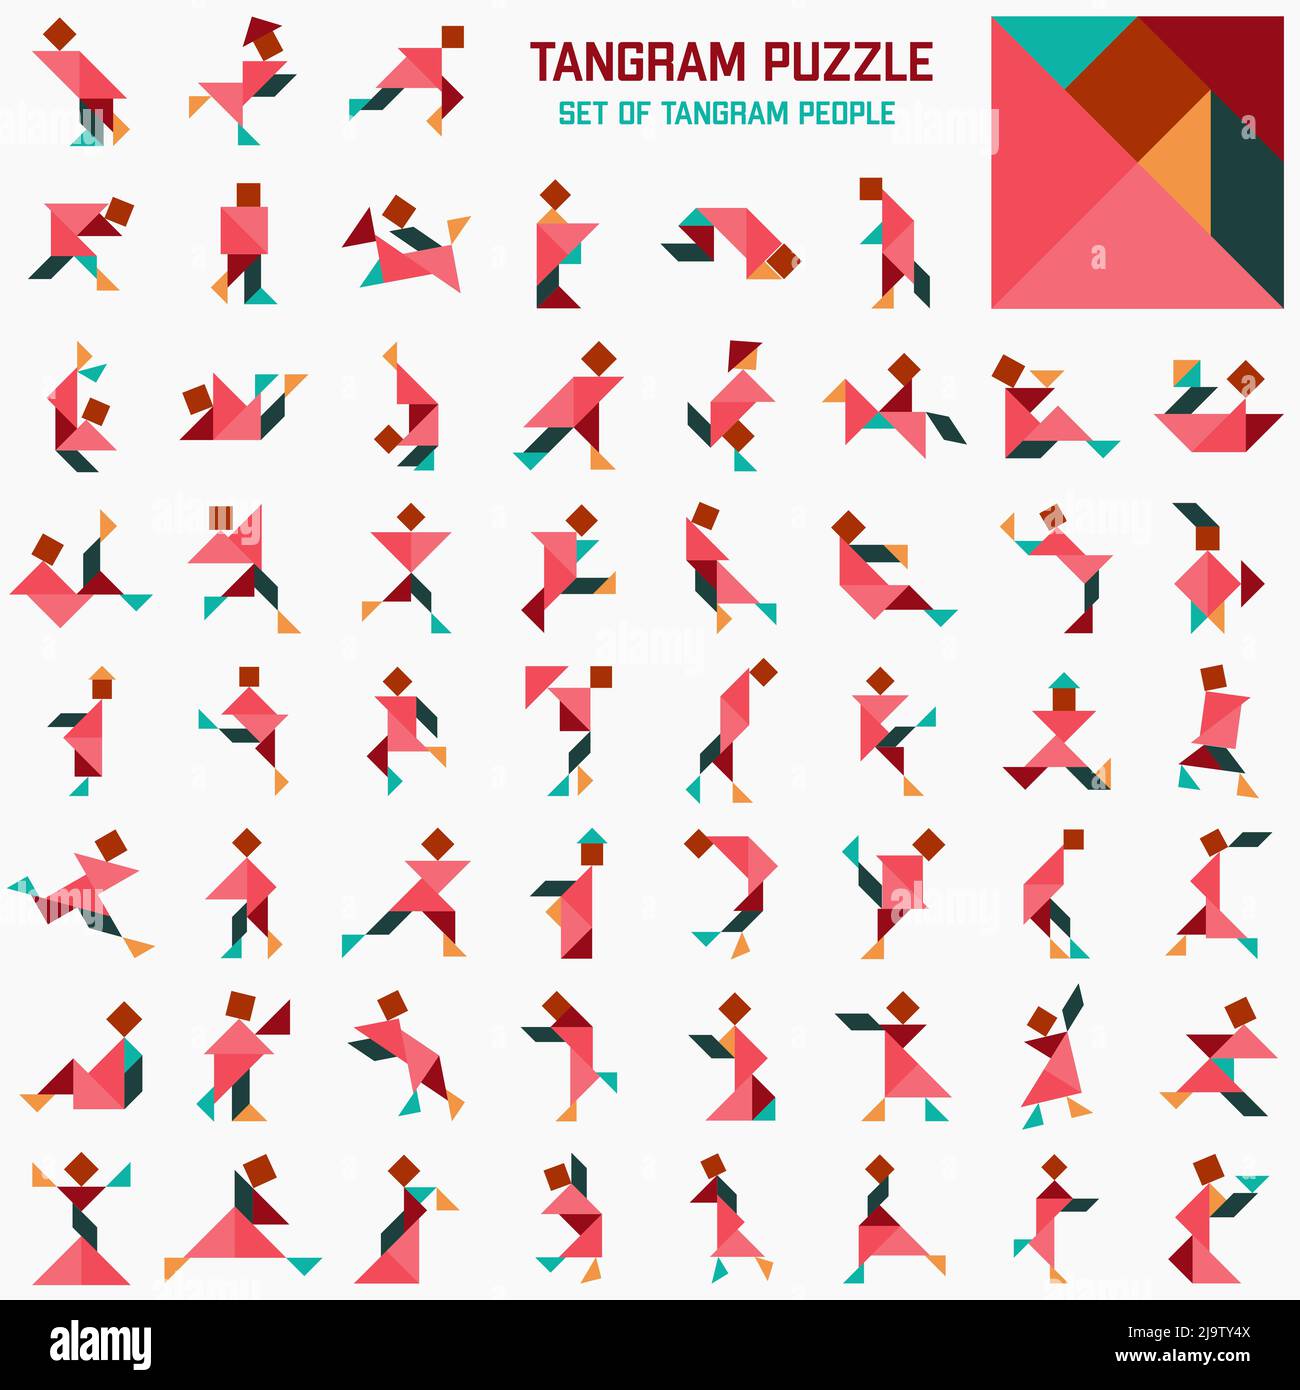 Human figure puzzle game piece Stock Vector Images - Alamy